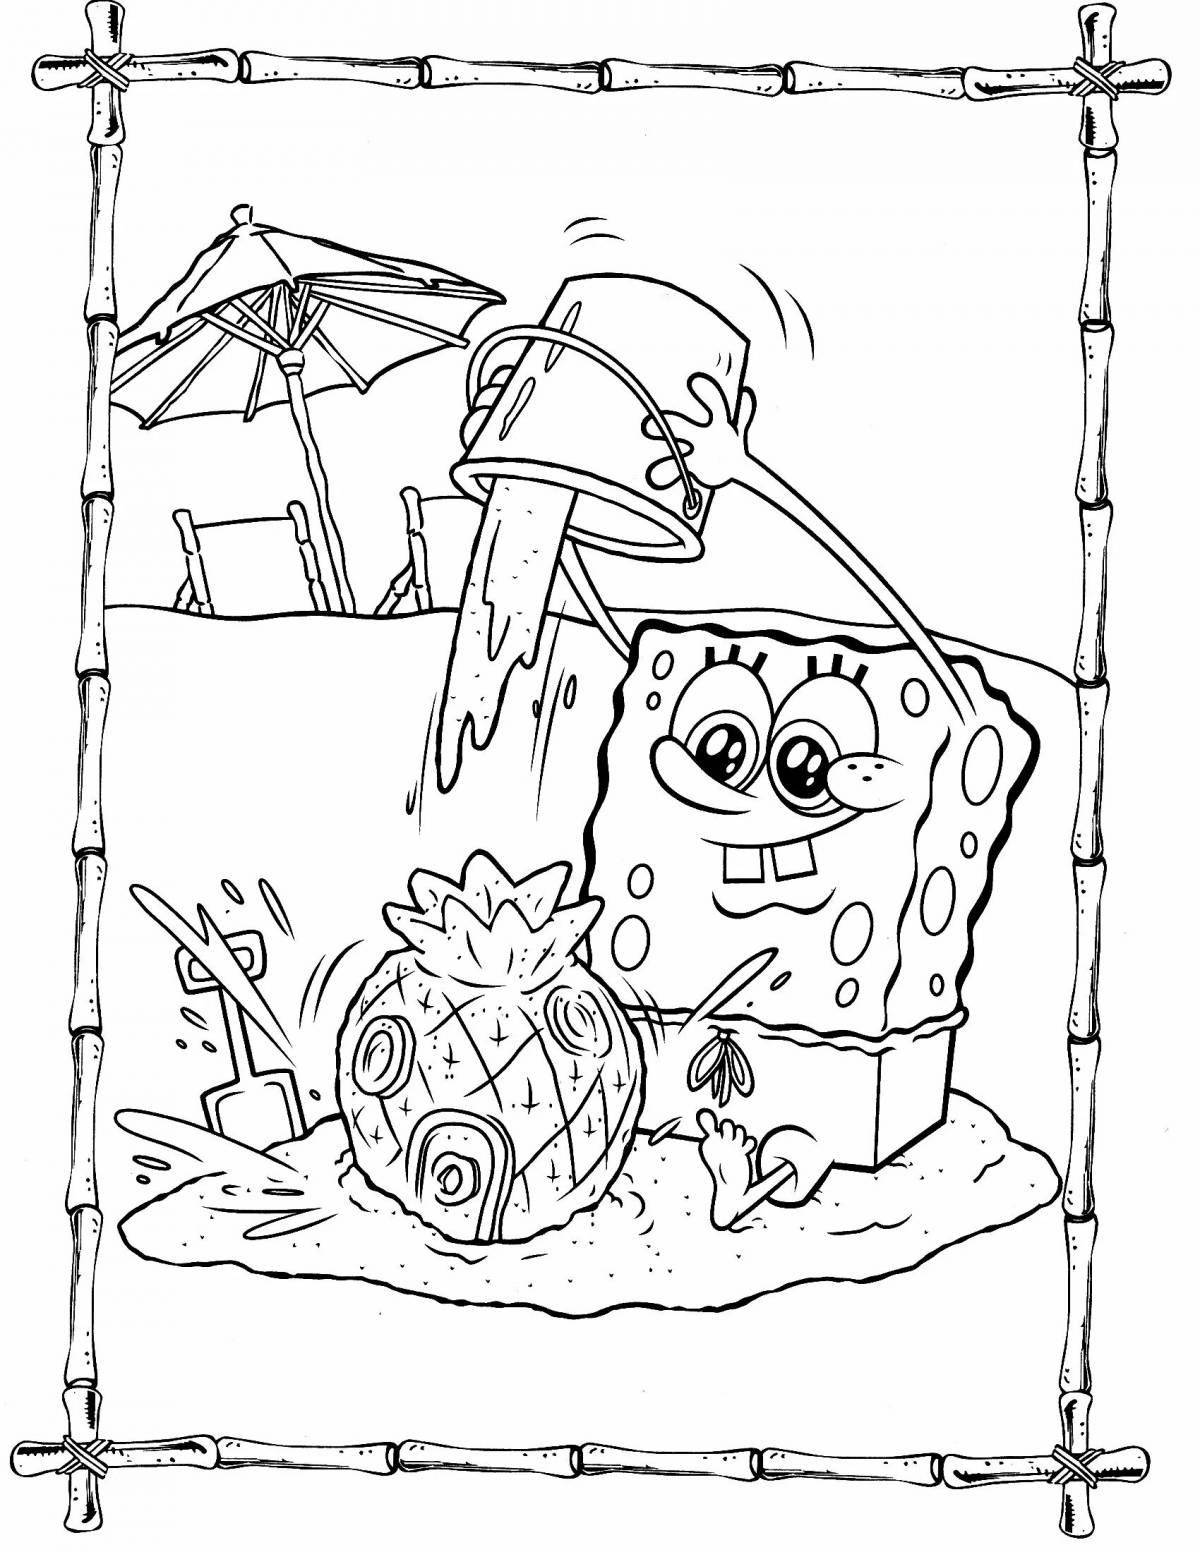 Spongebob coloring page with colored splashes